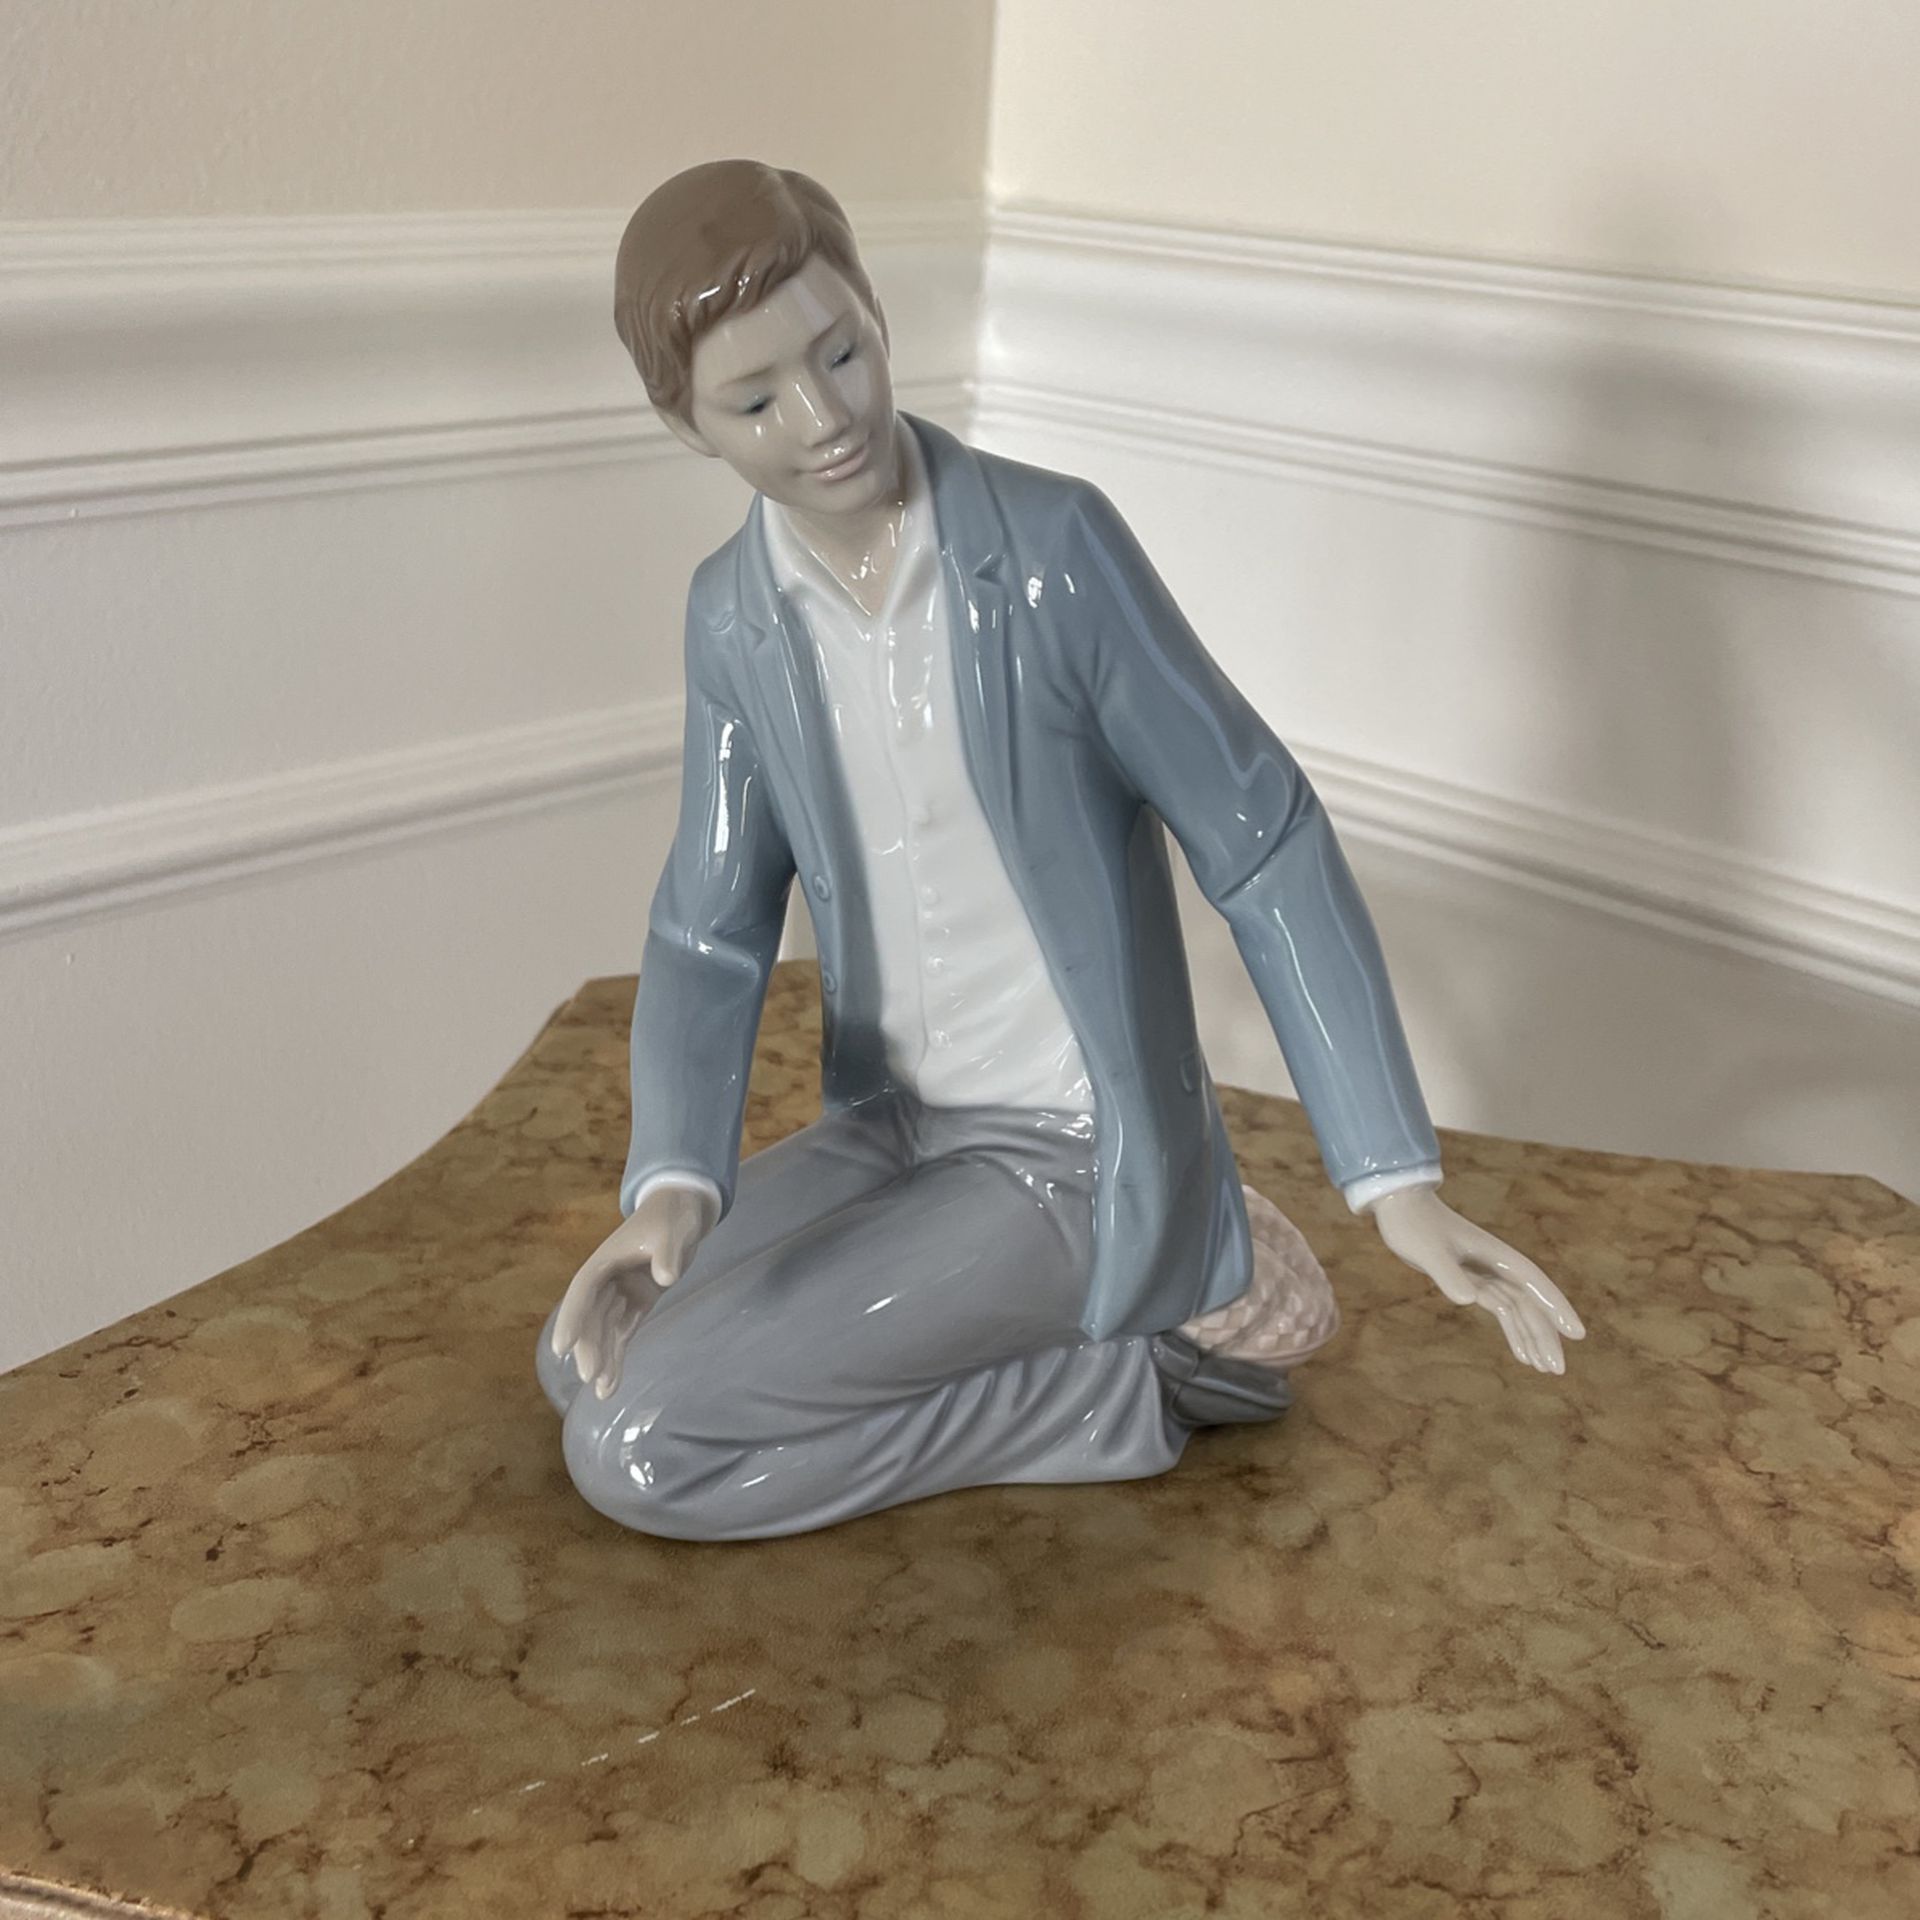 Lladro “Caring Father”